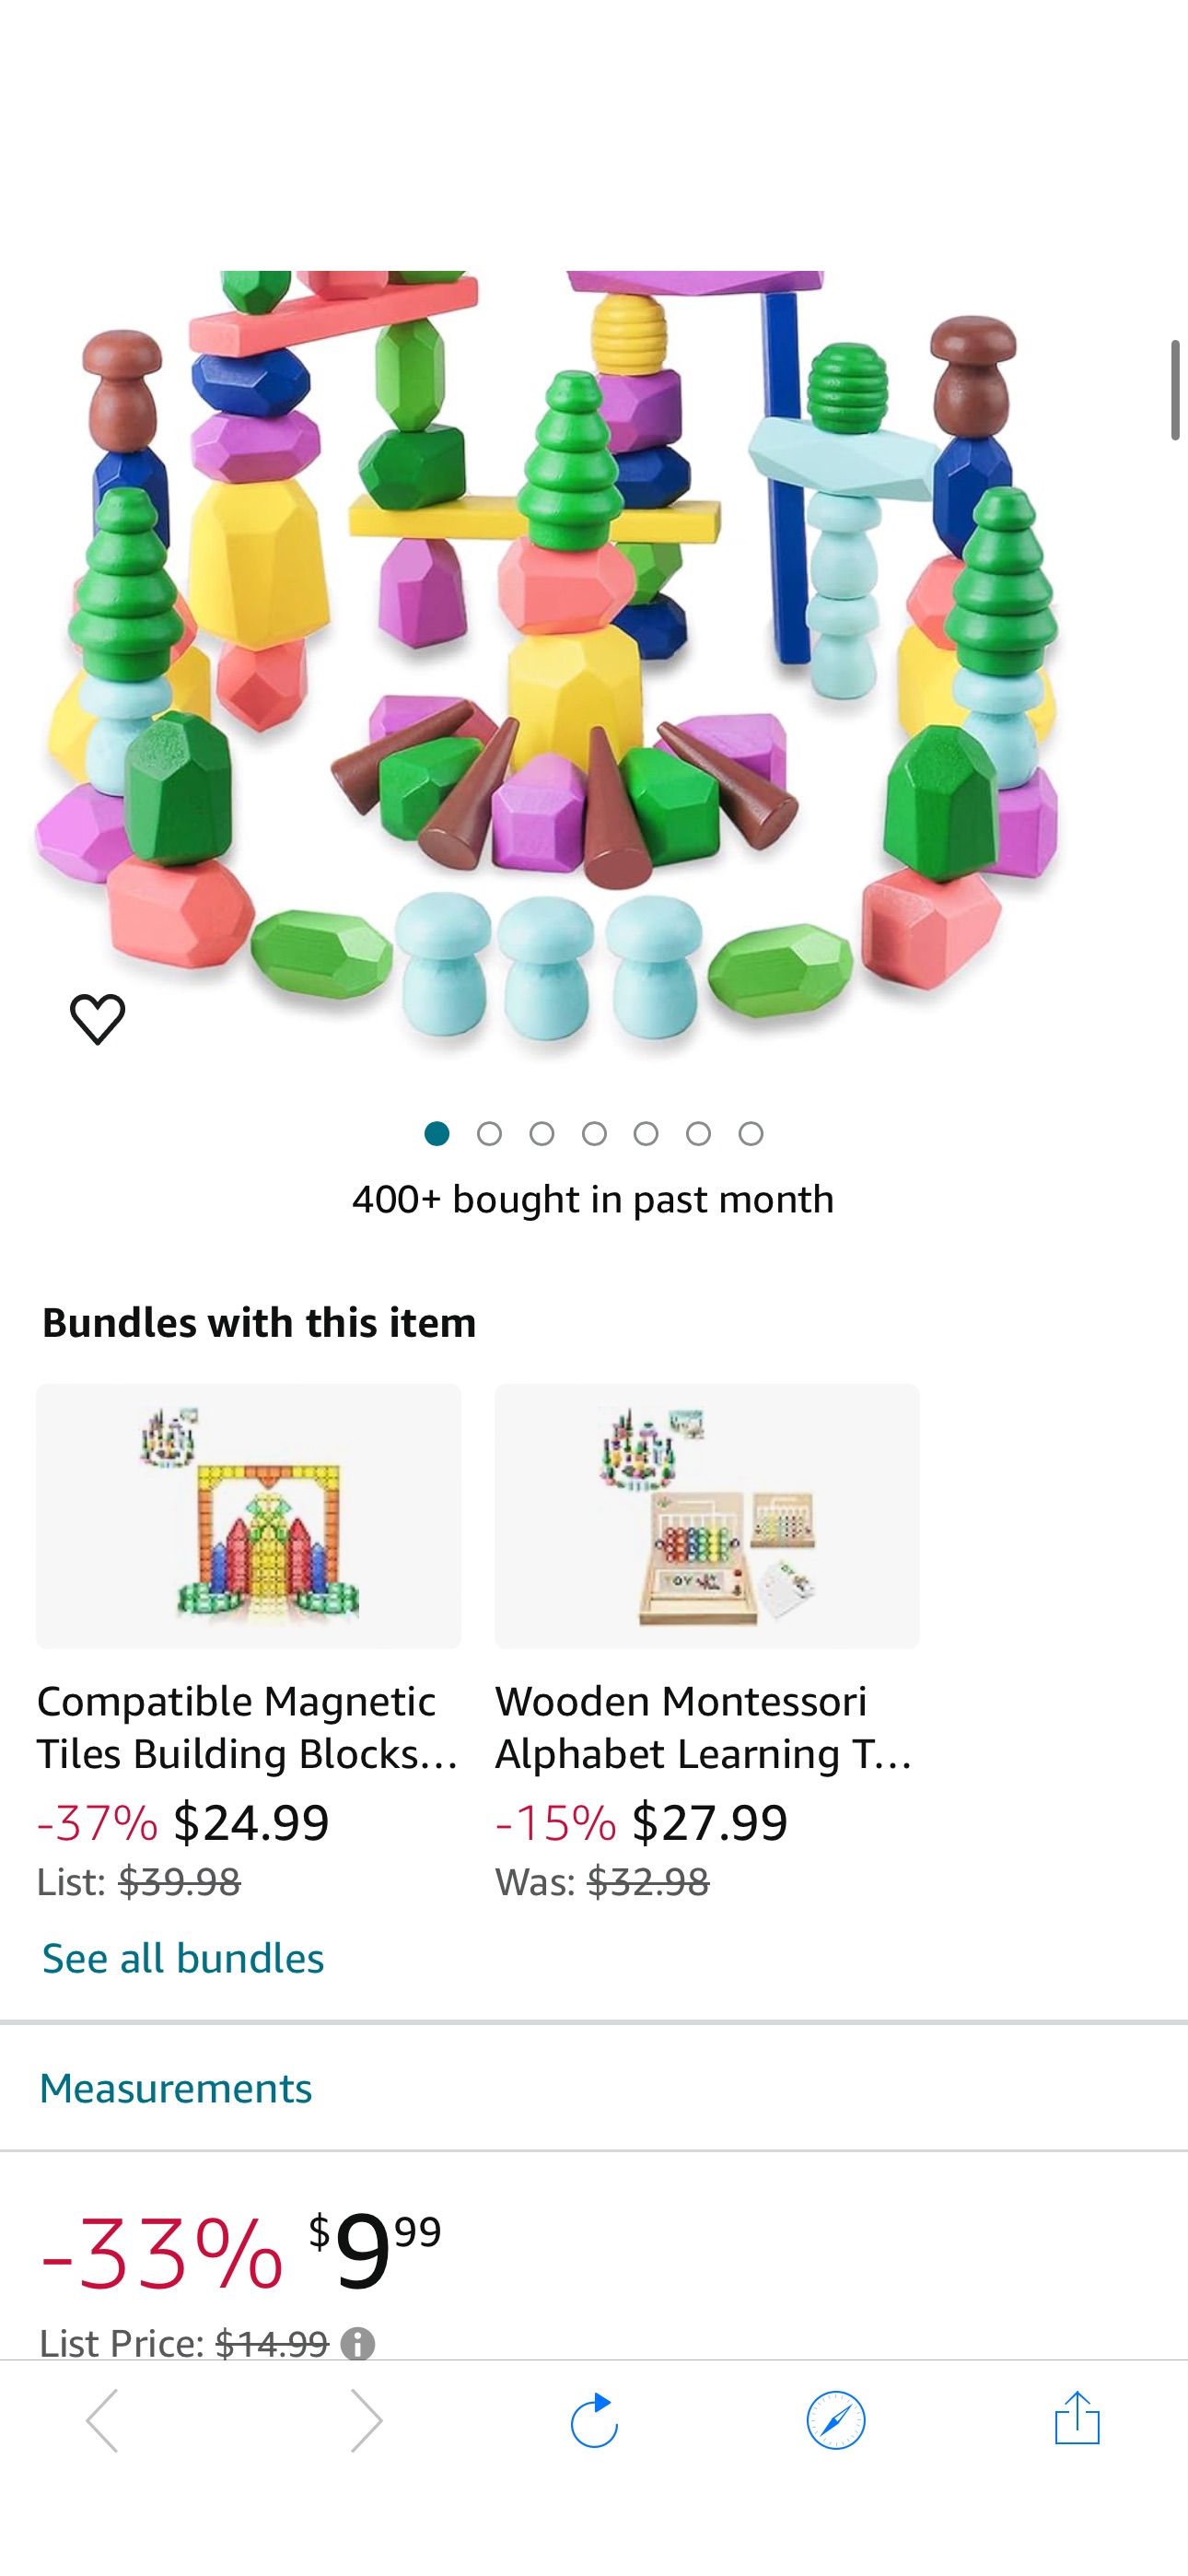 Amazon.com: Toys for 3 Year Old Boys Girls, 36 PCS Colorful Wooden Sorting Stacking Rocks $6.xx 36 PCS Colorful Wooden Sorting Stacking Rocks
Use Code 39FT274P